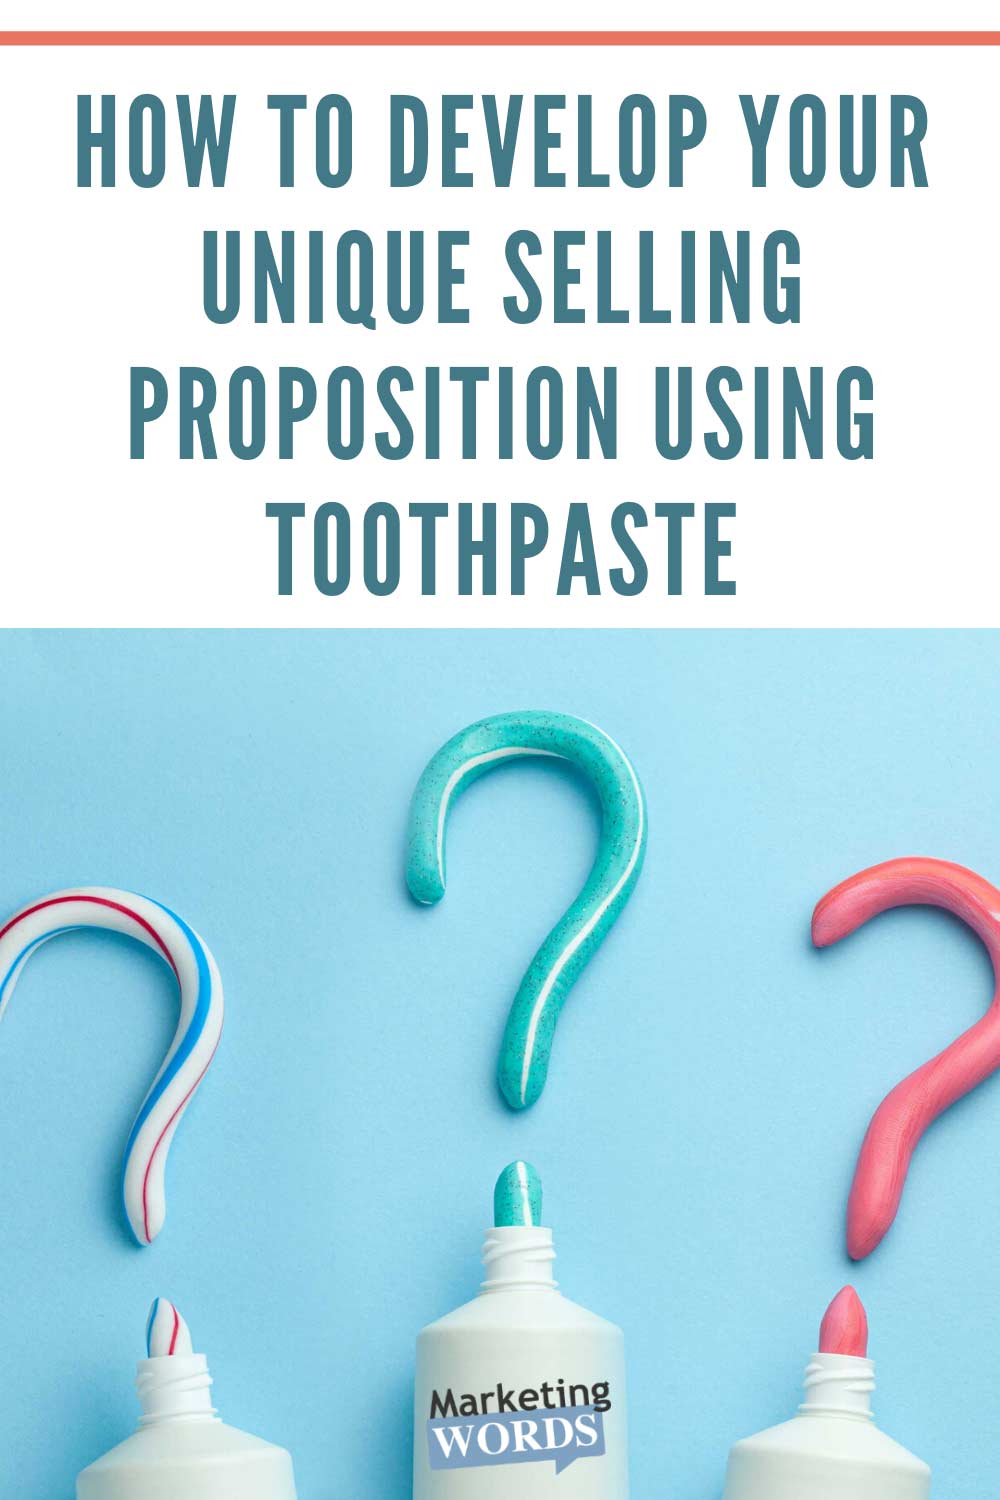 How to Develop Your Unique Selling Proposition Using Toothpaste